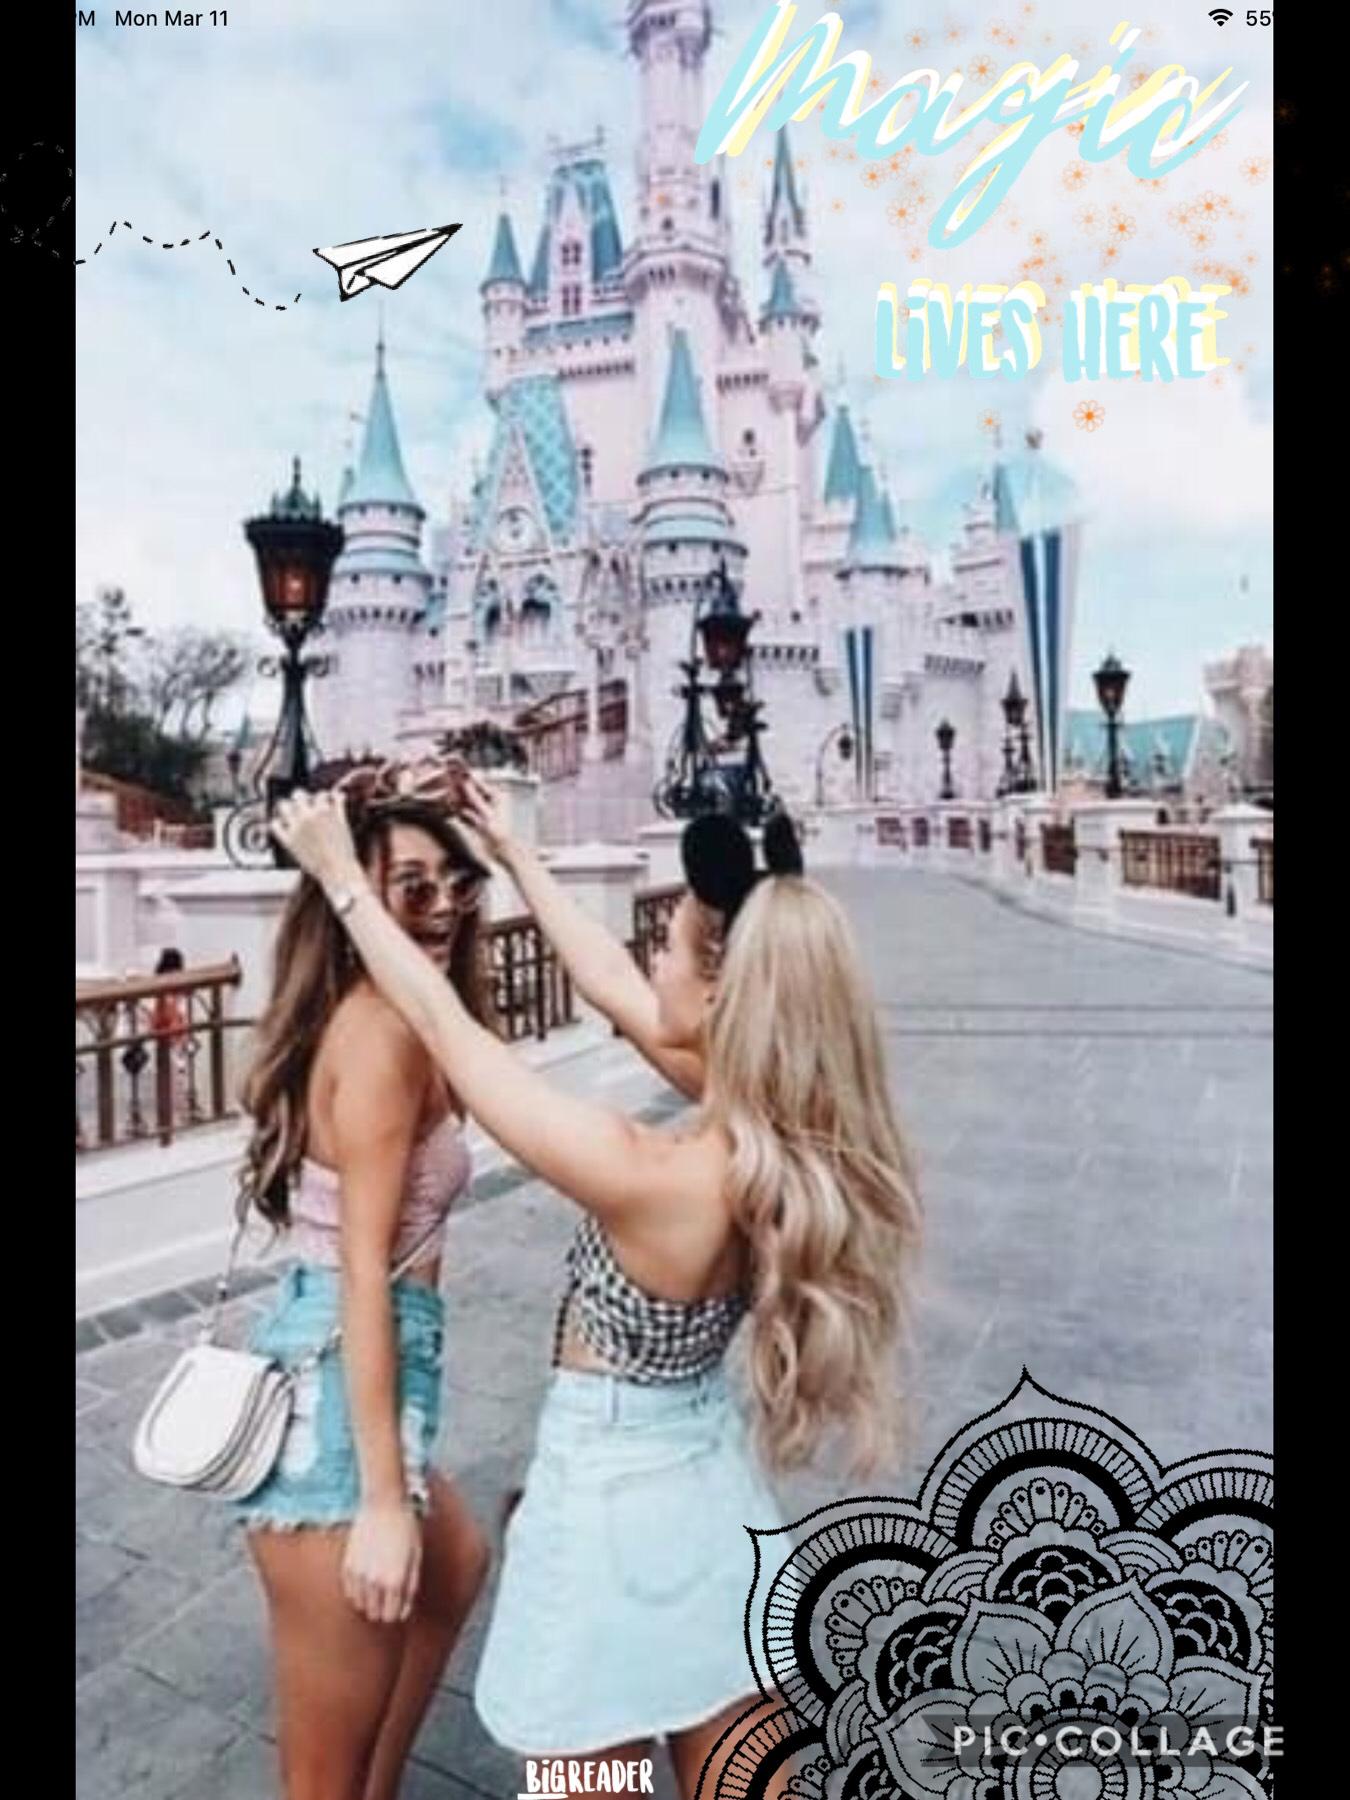 Today is National Siblings Day! 💜 Don’t forget to enter my Disney collage contest! Details can be found in my last collage. Should I have a second account? Like maybe an extras or something?💕 Tell me what you think!😊have a great day! Shoutout to Ocean Cov